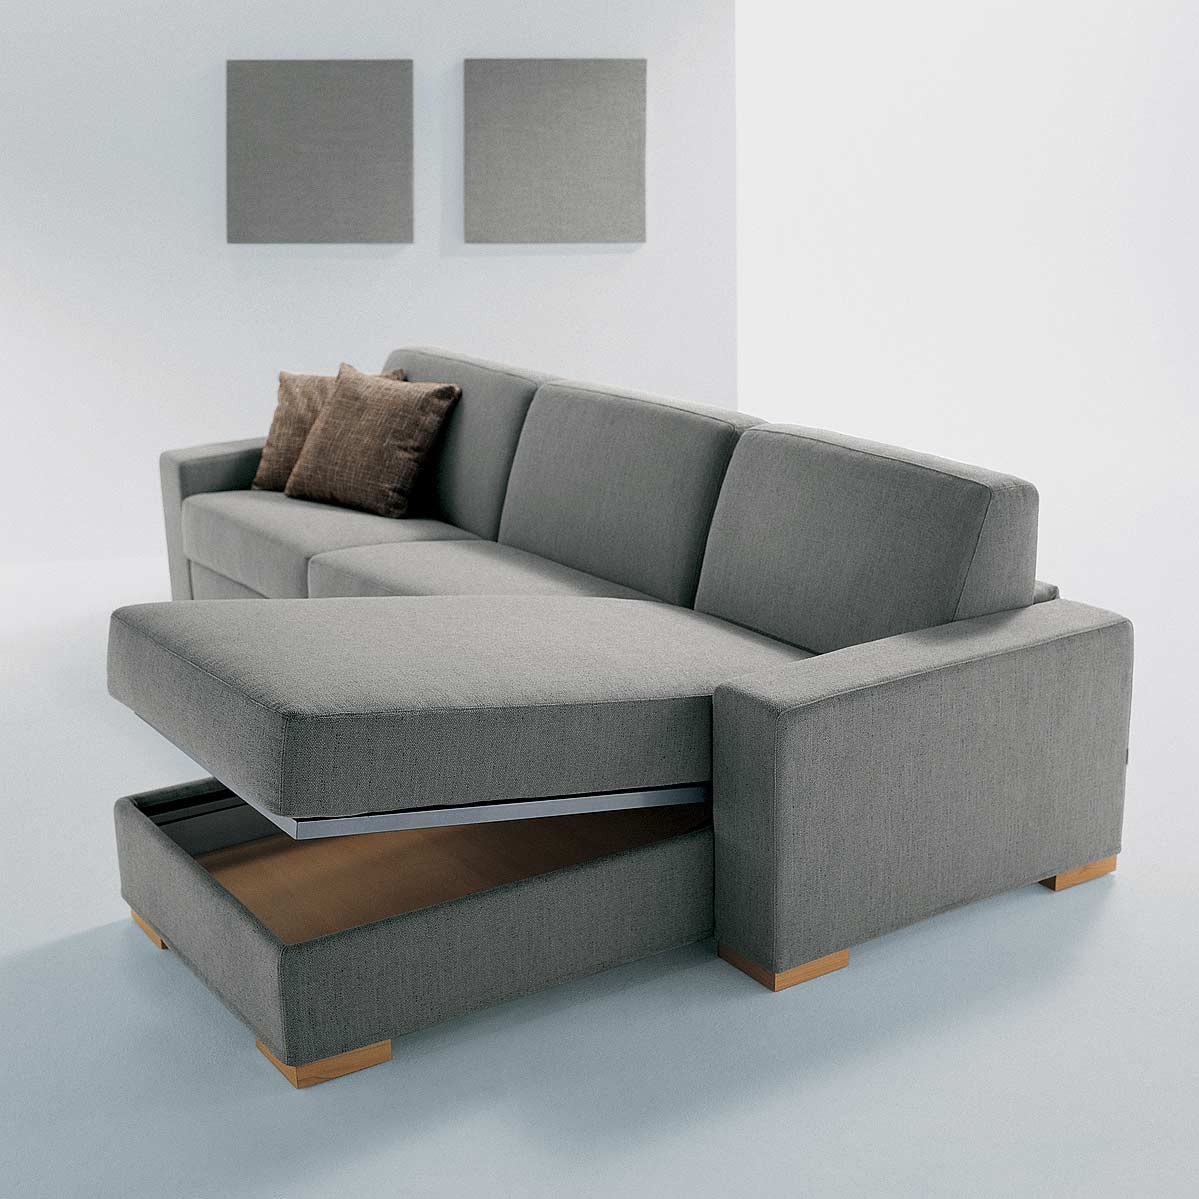 Modern-Minimalist-Sofa-Bed-with-Soft-Memory-Foam-Materials-in-Light-Grey-Color